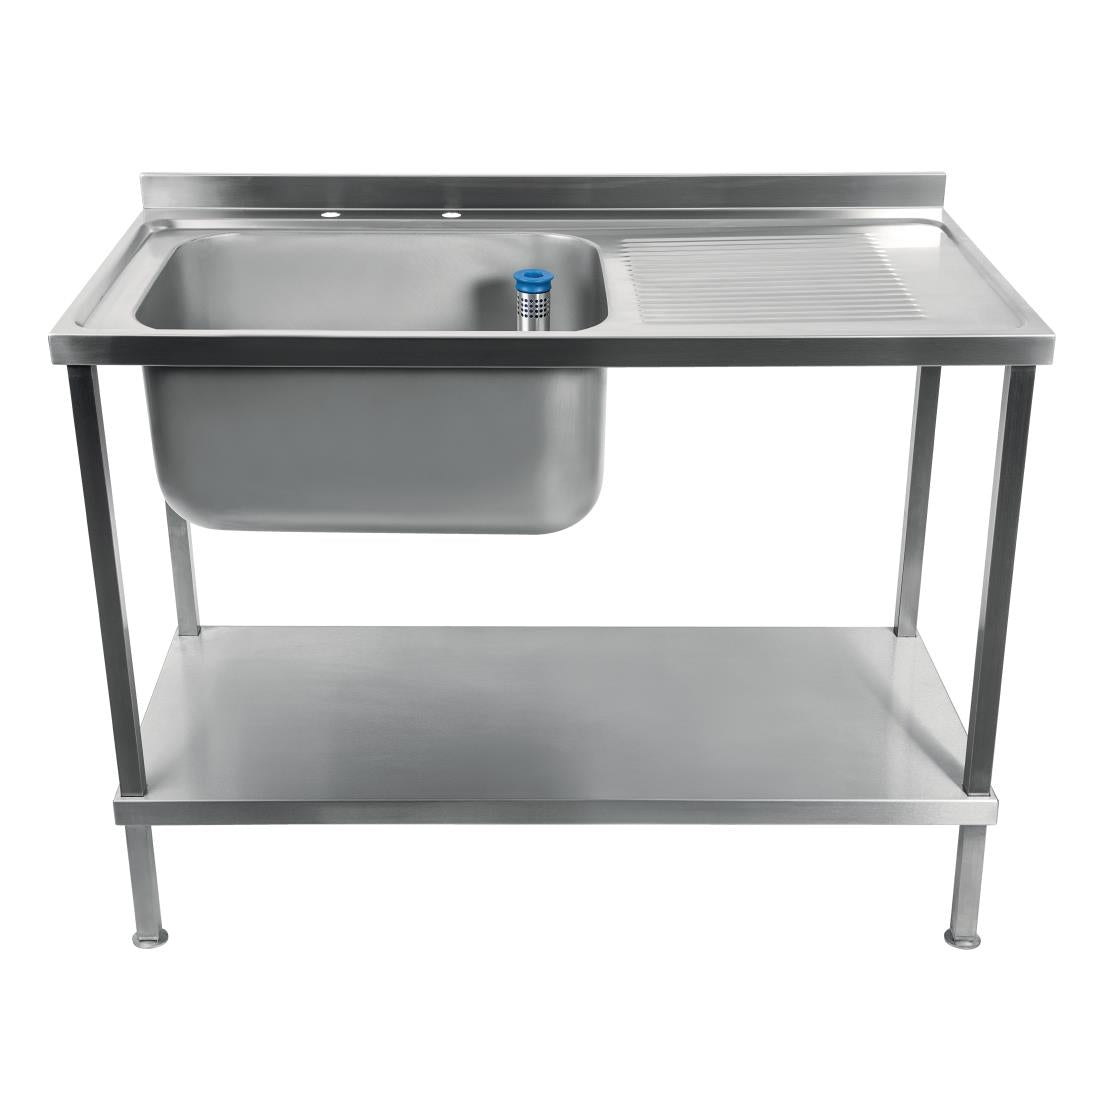 DR380 Holmes Fully Assembled Stainless Steel Sink Right Hand Drainer 1000mm JD Catering Equipment Solutions Ltd